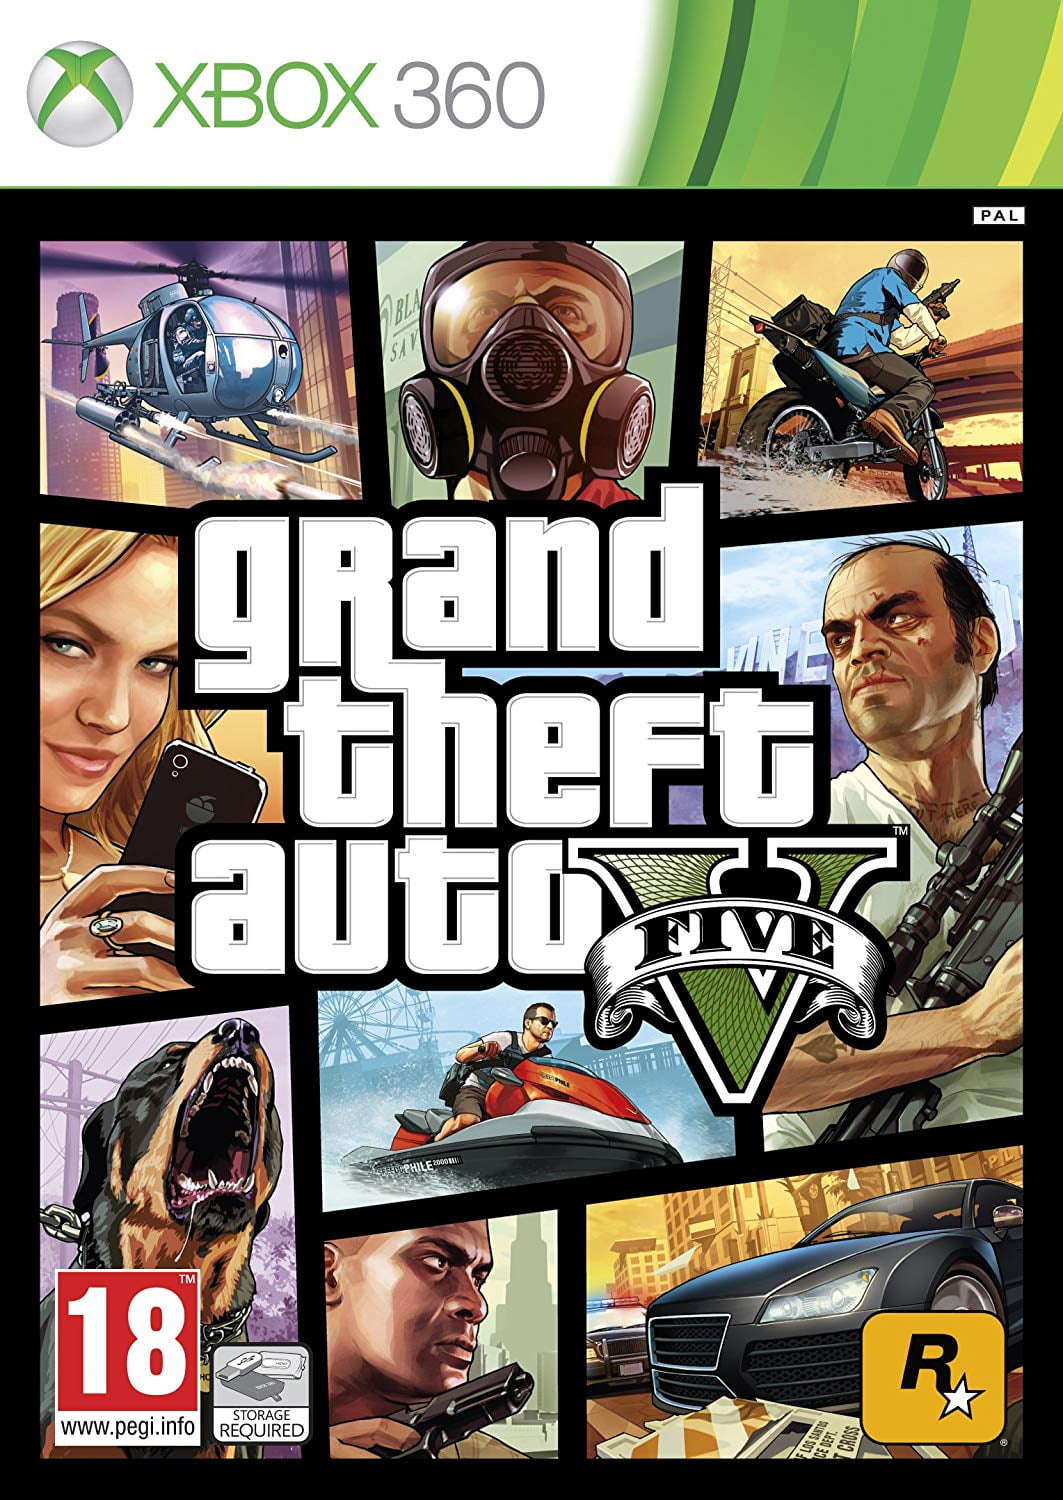 Take 2 GTA V Grand Theft Auto 5 Xbox 360, Open world with mission based story line By Rockstar Games